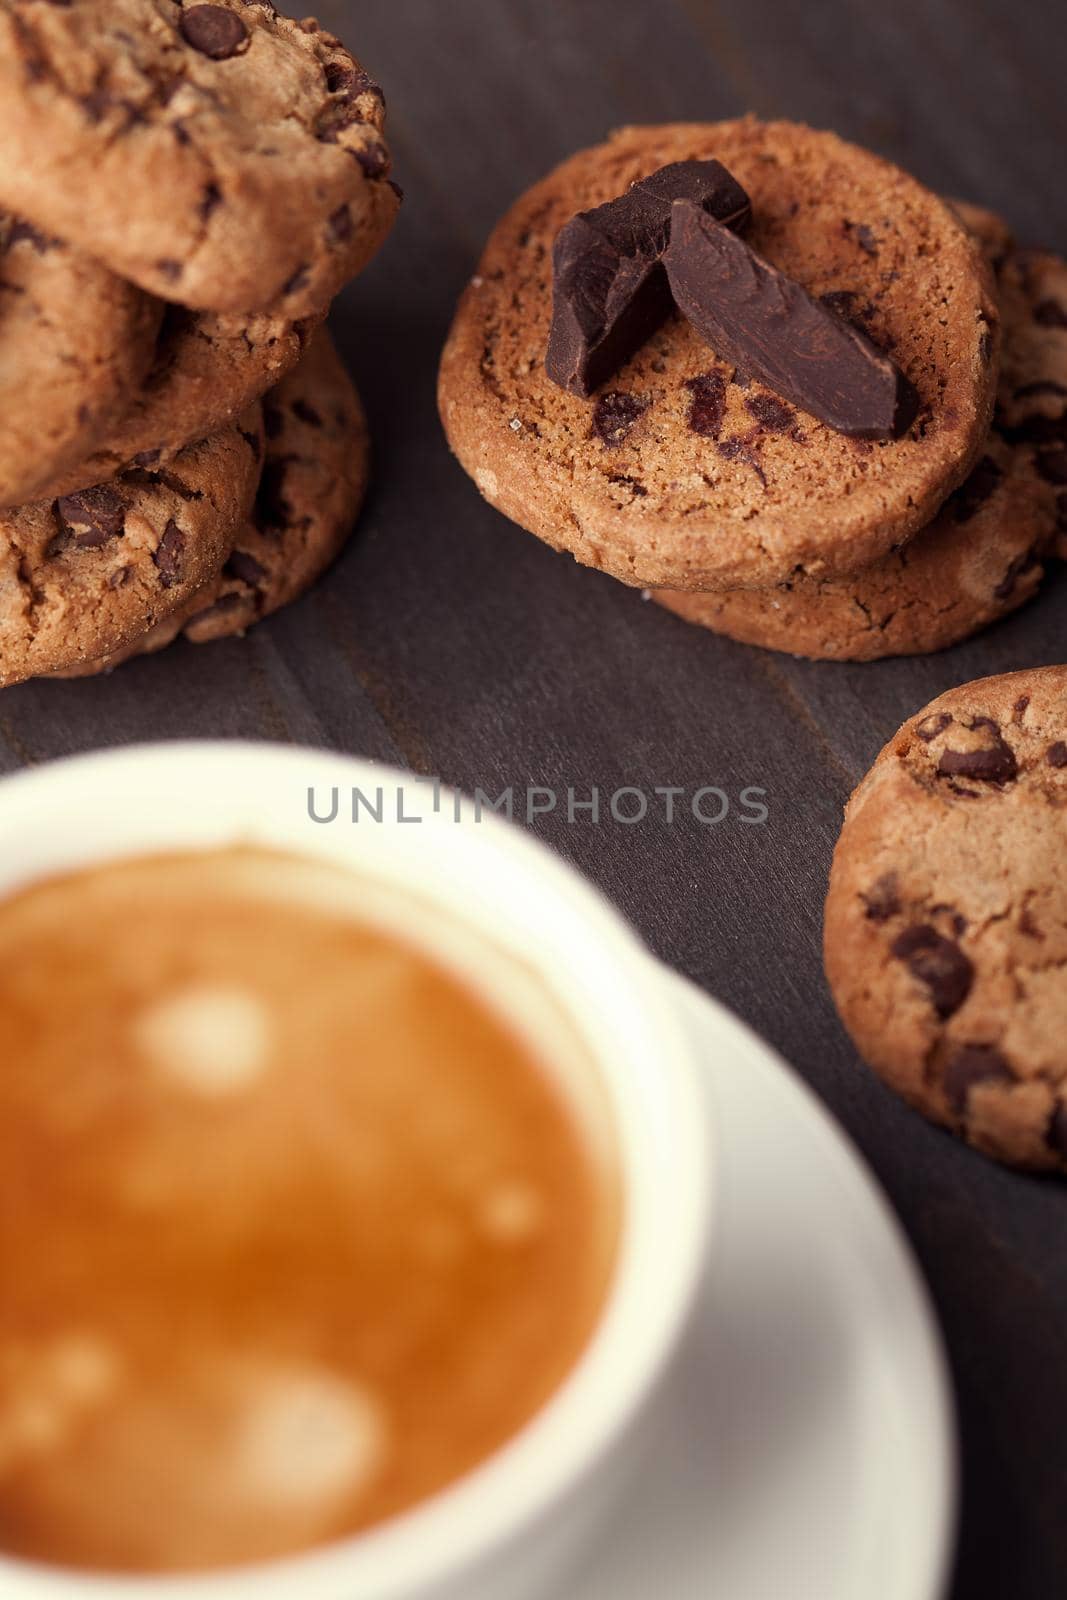 Homemade chocolate chip cookies and a cup of coffee on dark old wooden table. Sweet dessert.